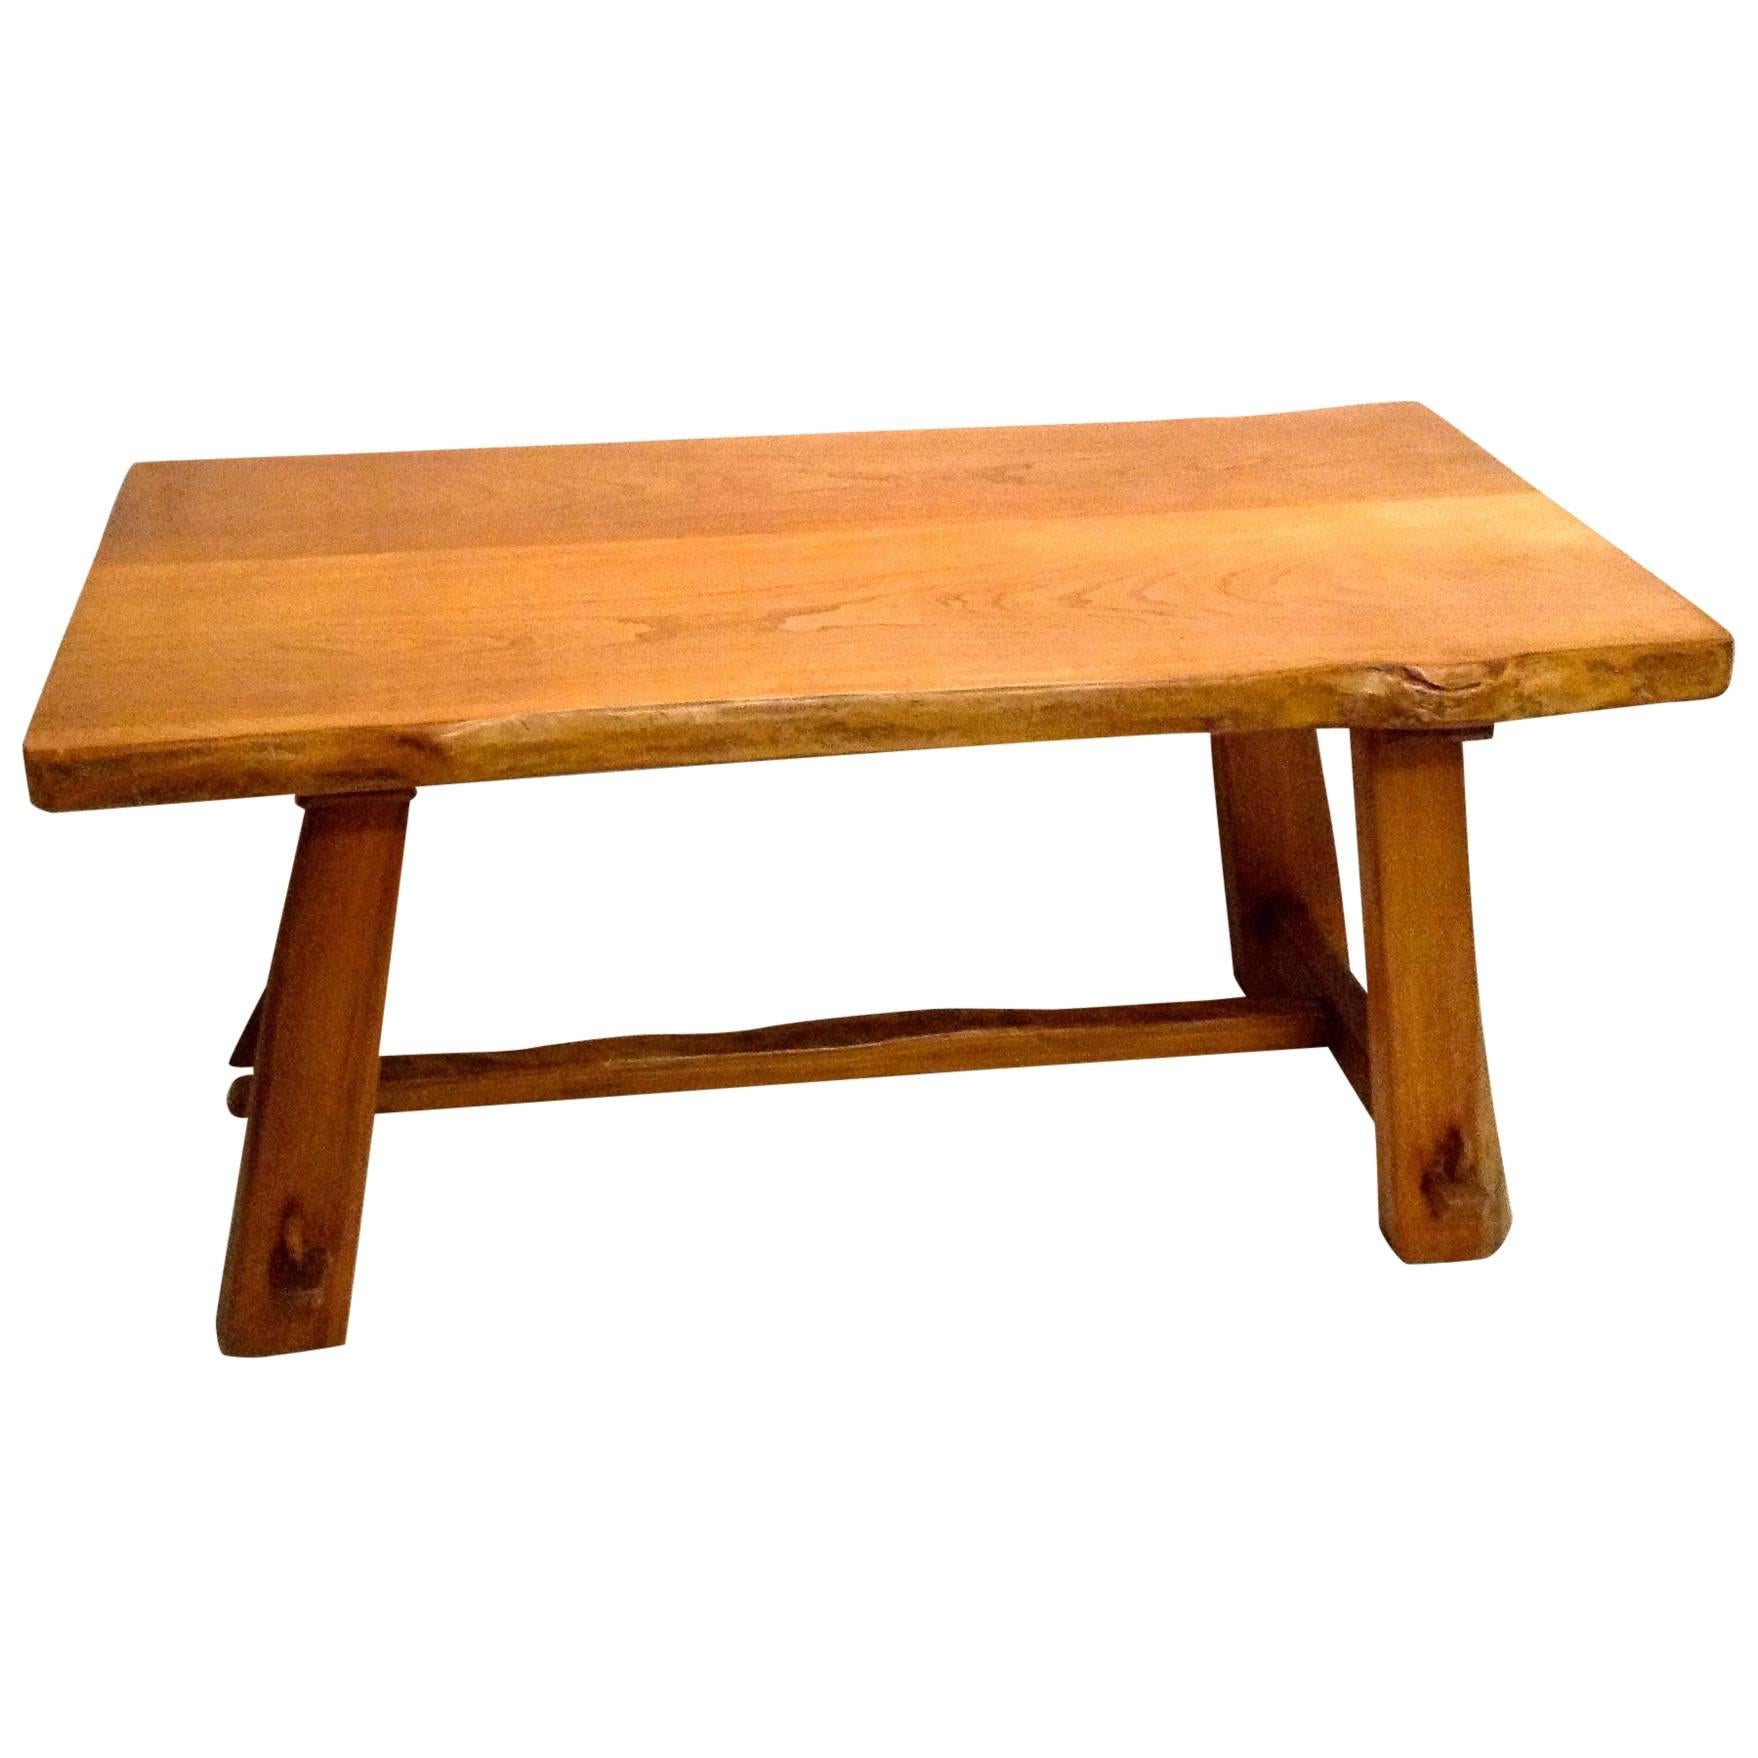 Finnish Wood Dining Room Table by Olavi Hanninen, 1st Edition, 1958 For Sale